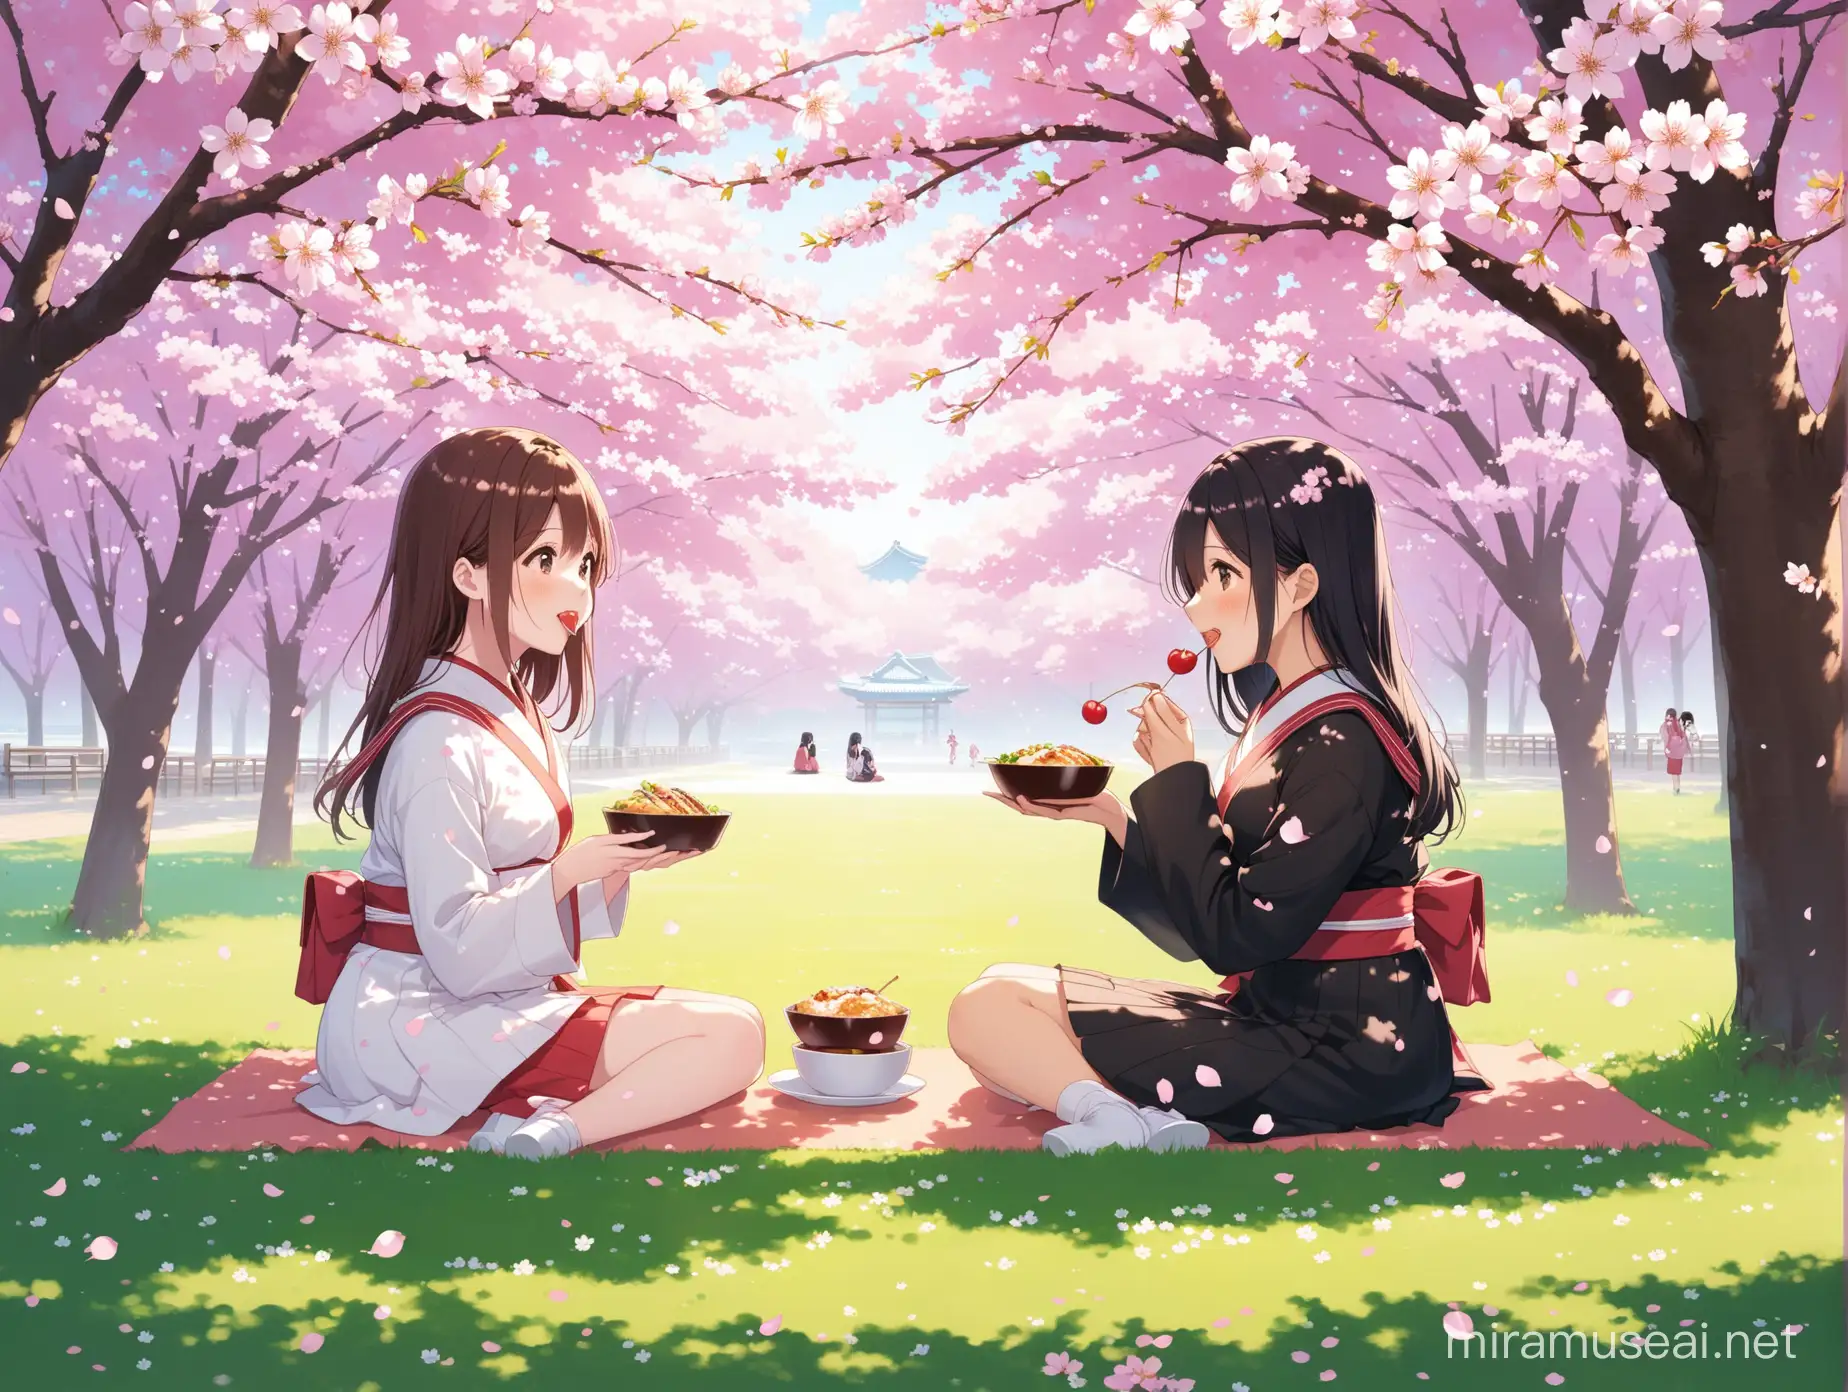 two girls were eating together under cherry blossoms